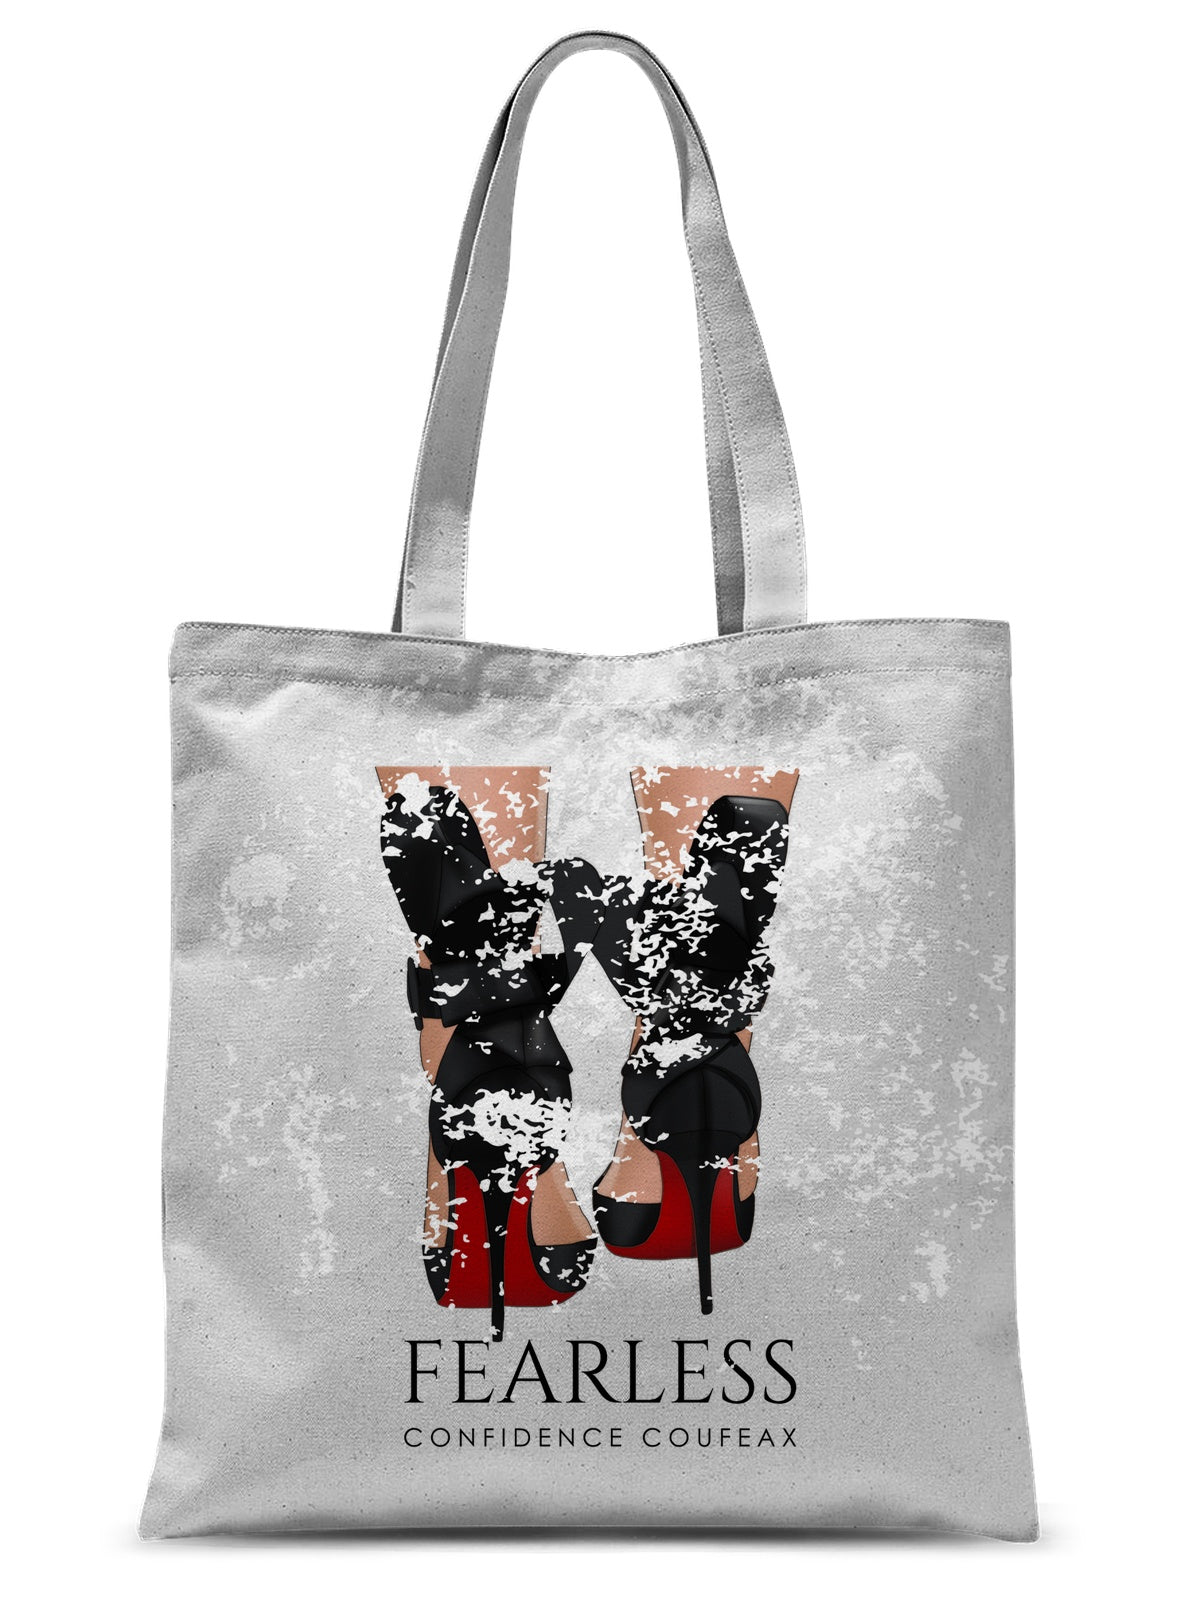 Fearless Confidence Coufeax   Tote Bag - Fearless Confidence Coufeax™